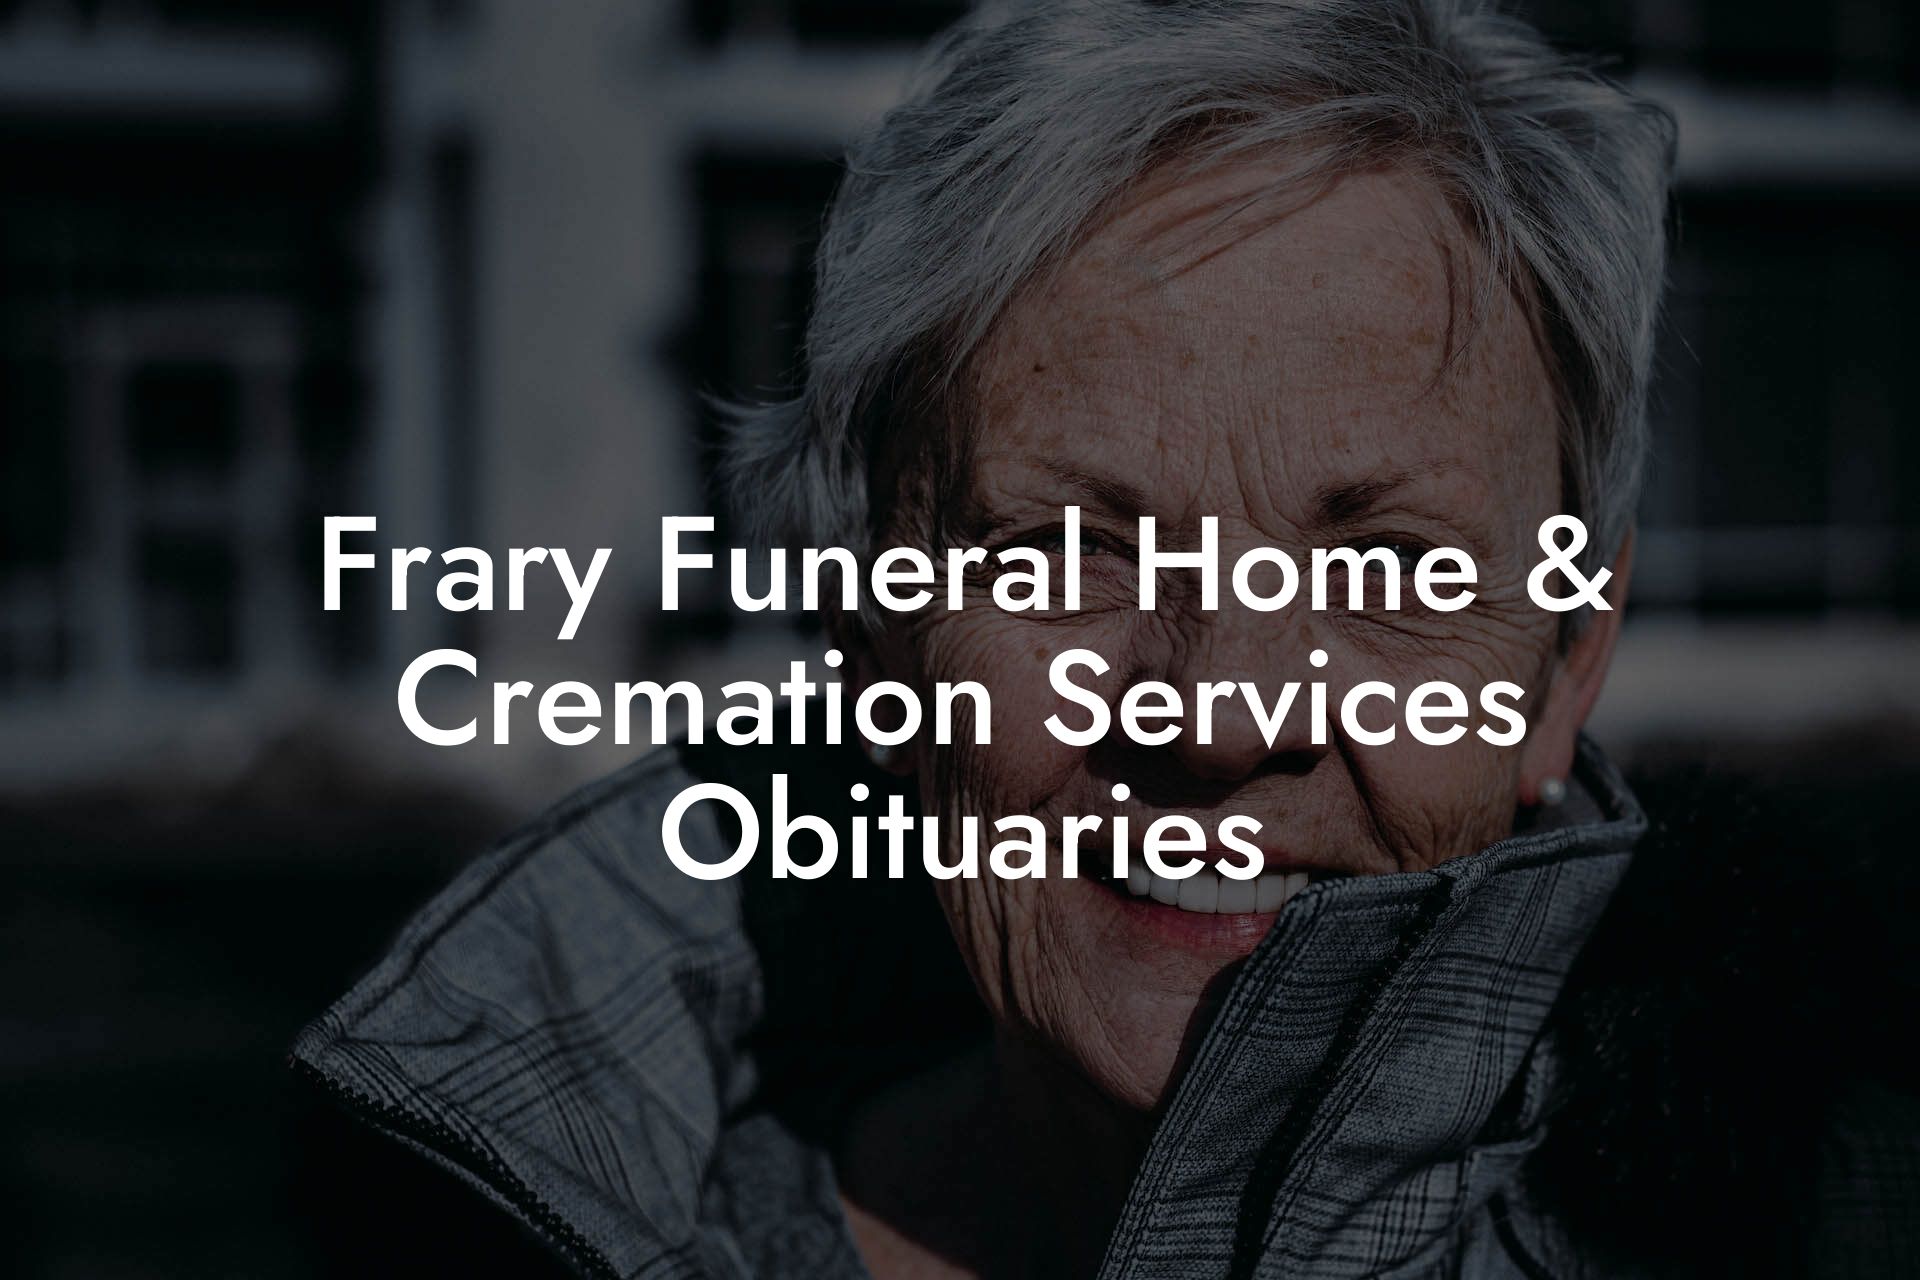 Frary Funeral Home & Cremation Services Obituaries